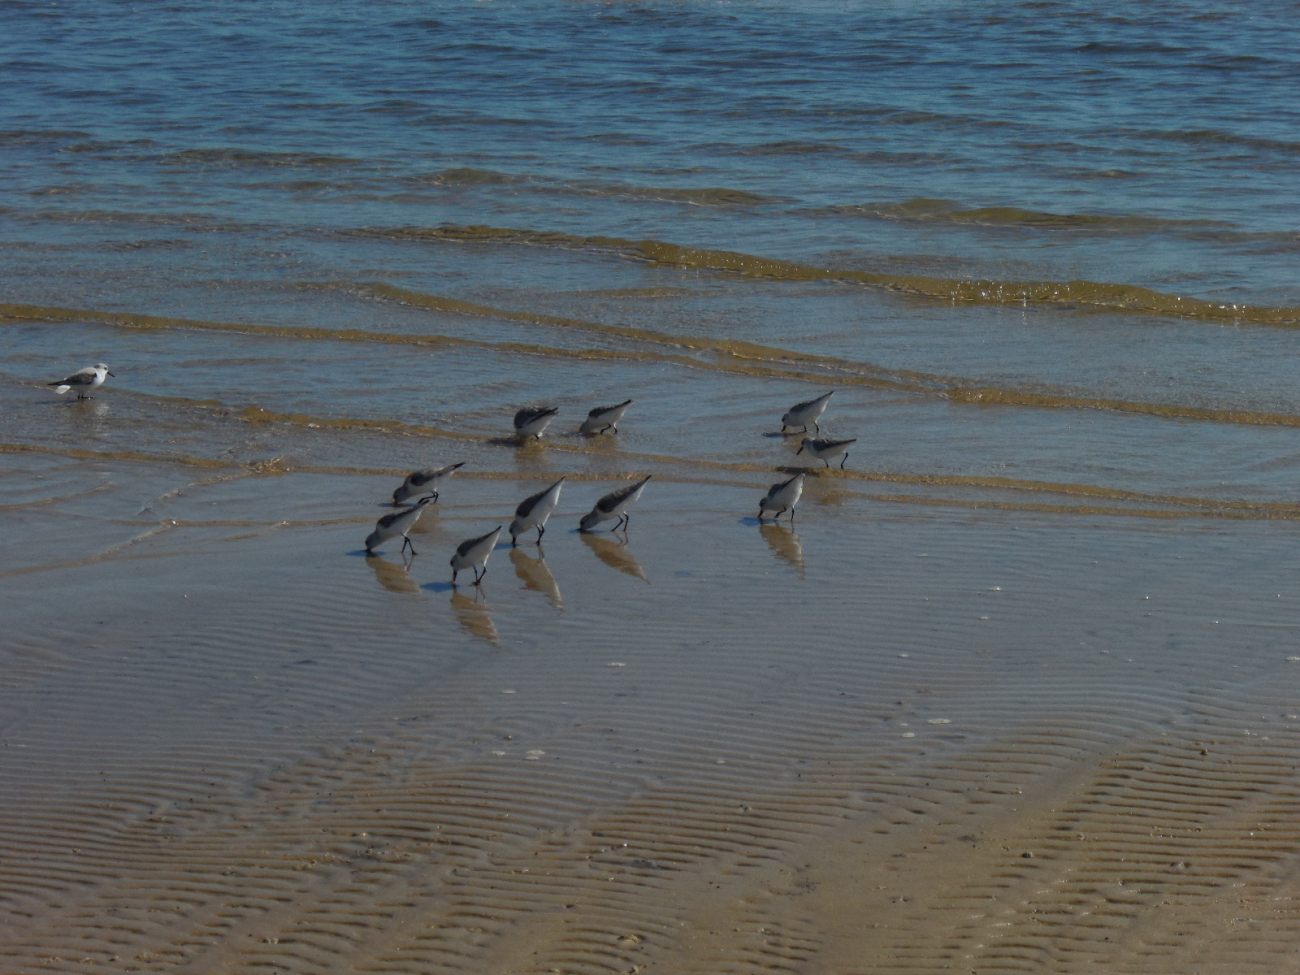 Bottoms UP! Birds feeding on the beach in Long Beach MS on a recordbreaking high temperature day